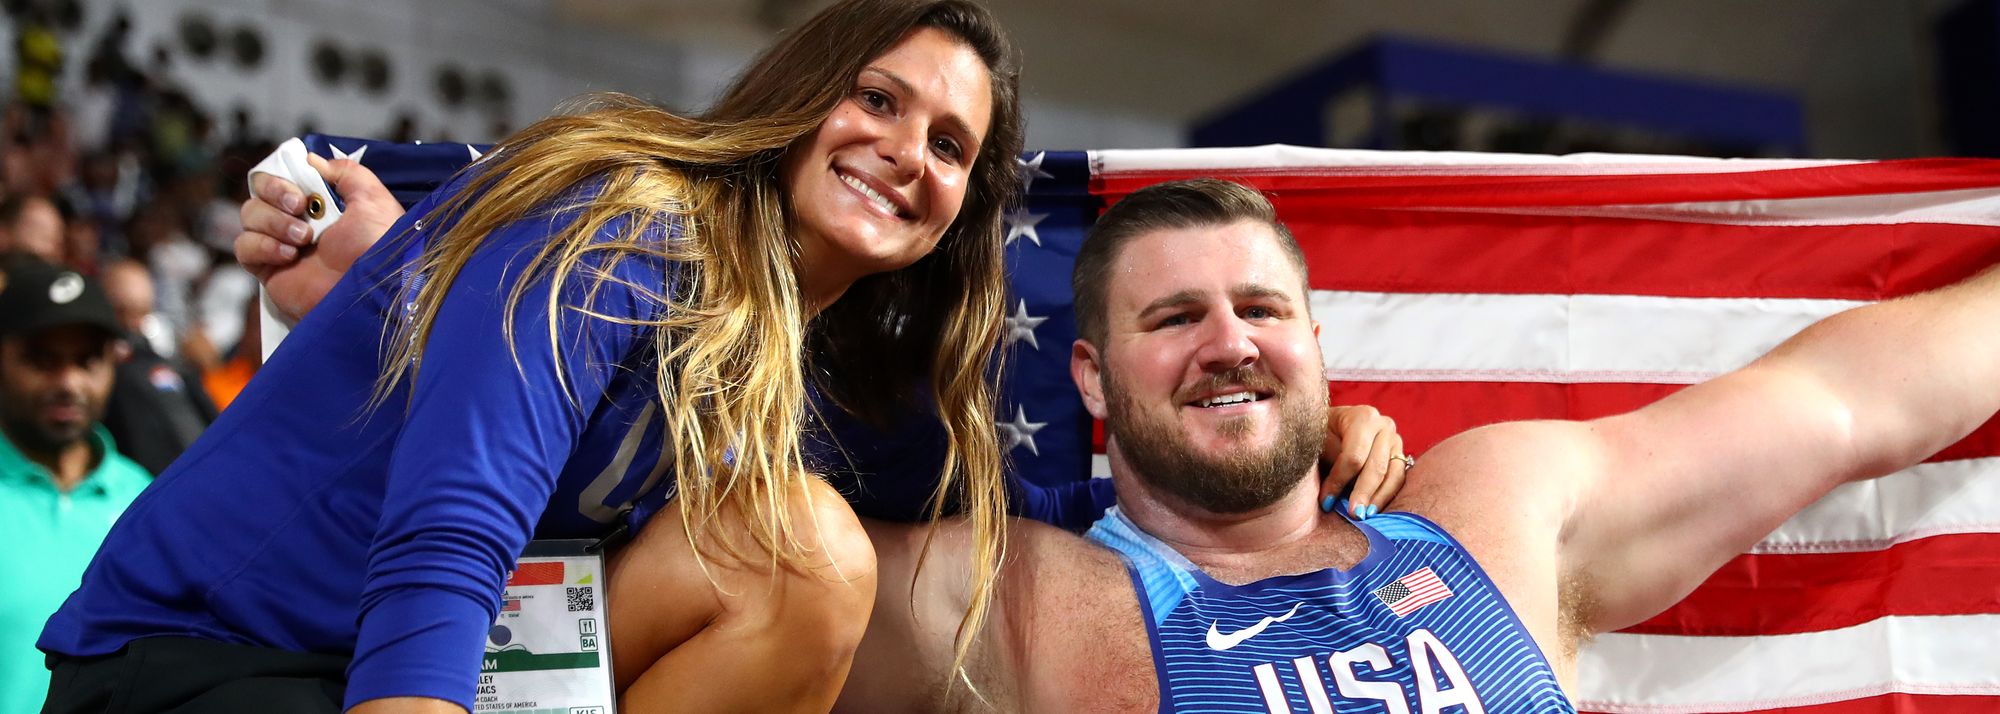 Ashley Kovacs, coach to two-time world shot put champion Joe Kovacs, is the first to star in this new podcast series